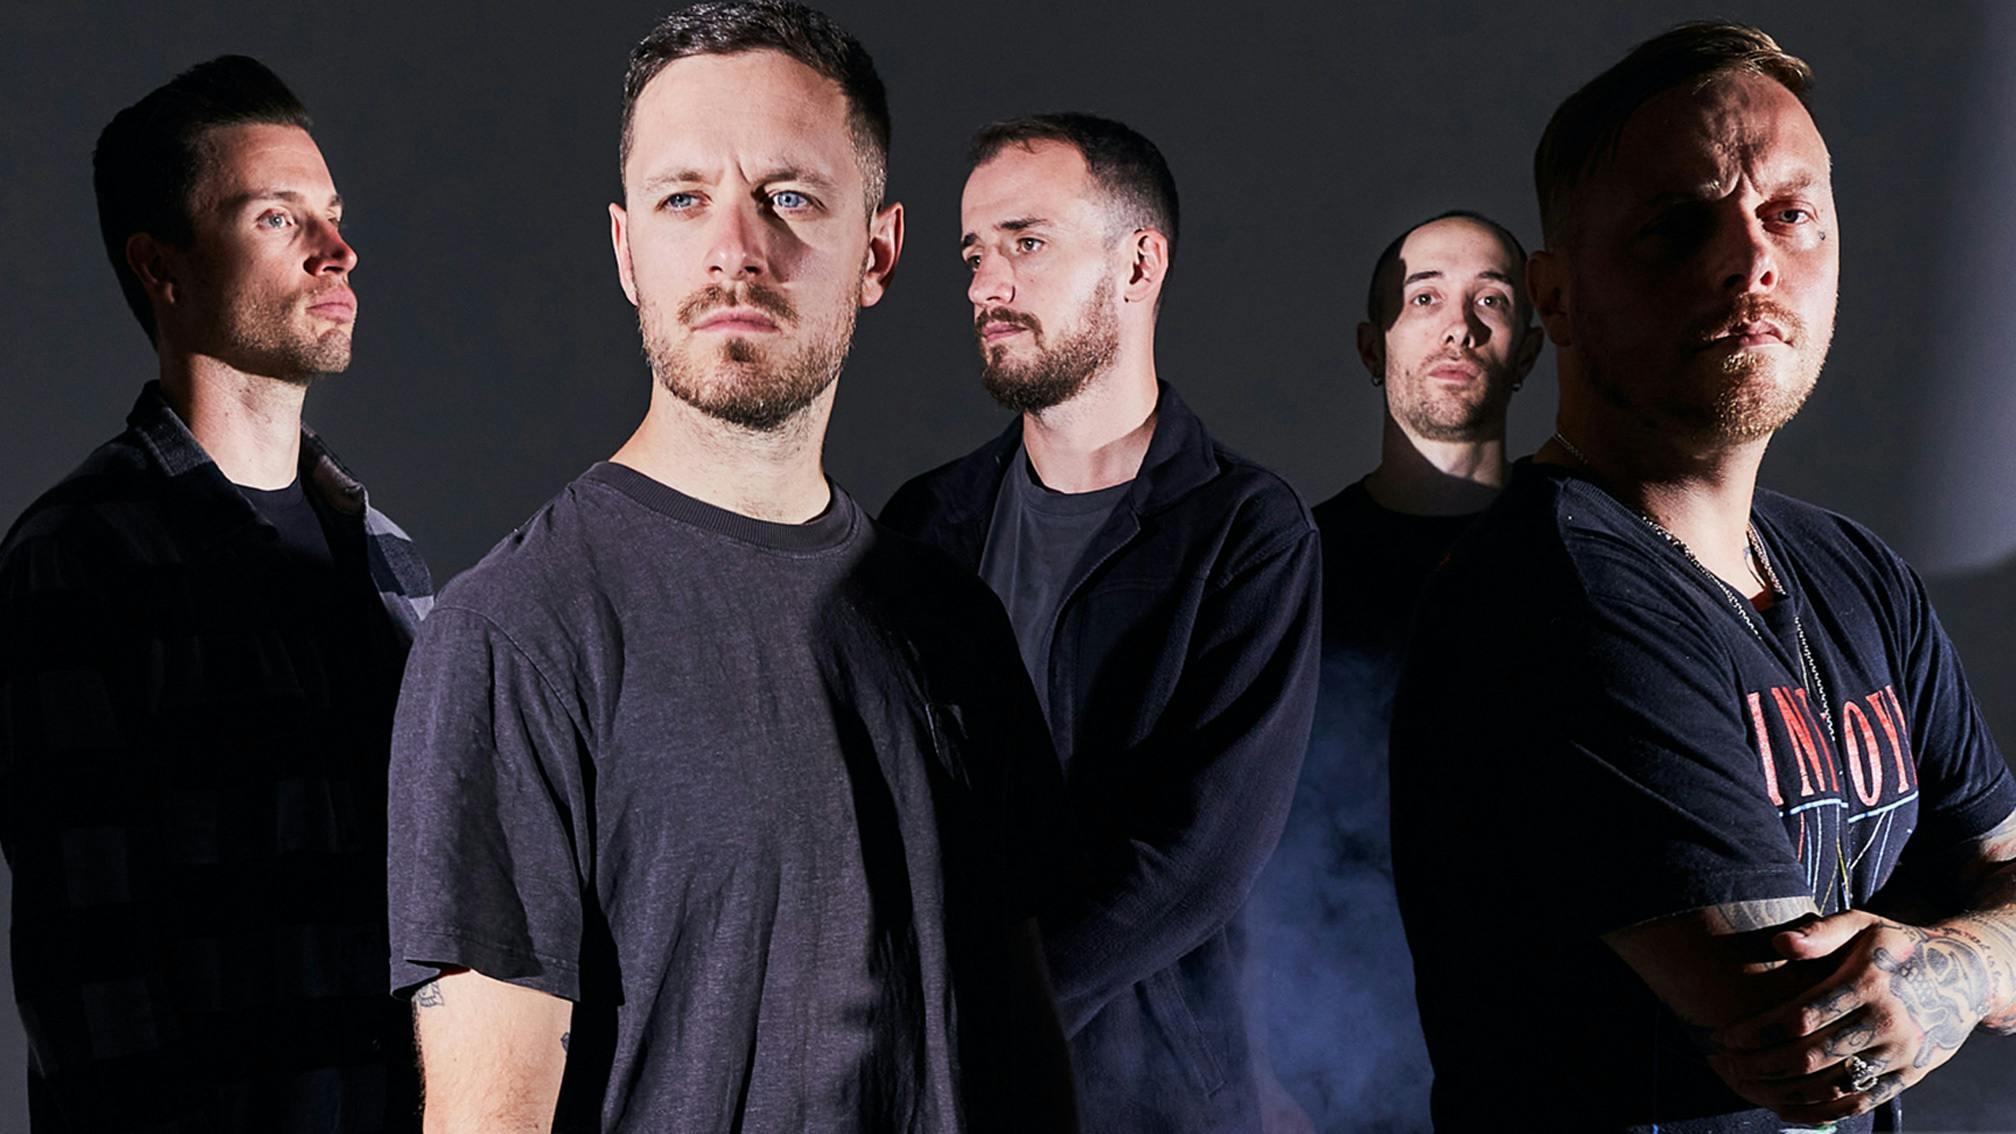 Sam Carter Talks Architects' New Collabs With Winston McCall, Simon Neil And Mike Kerr